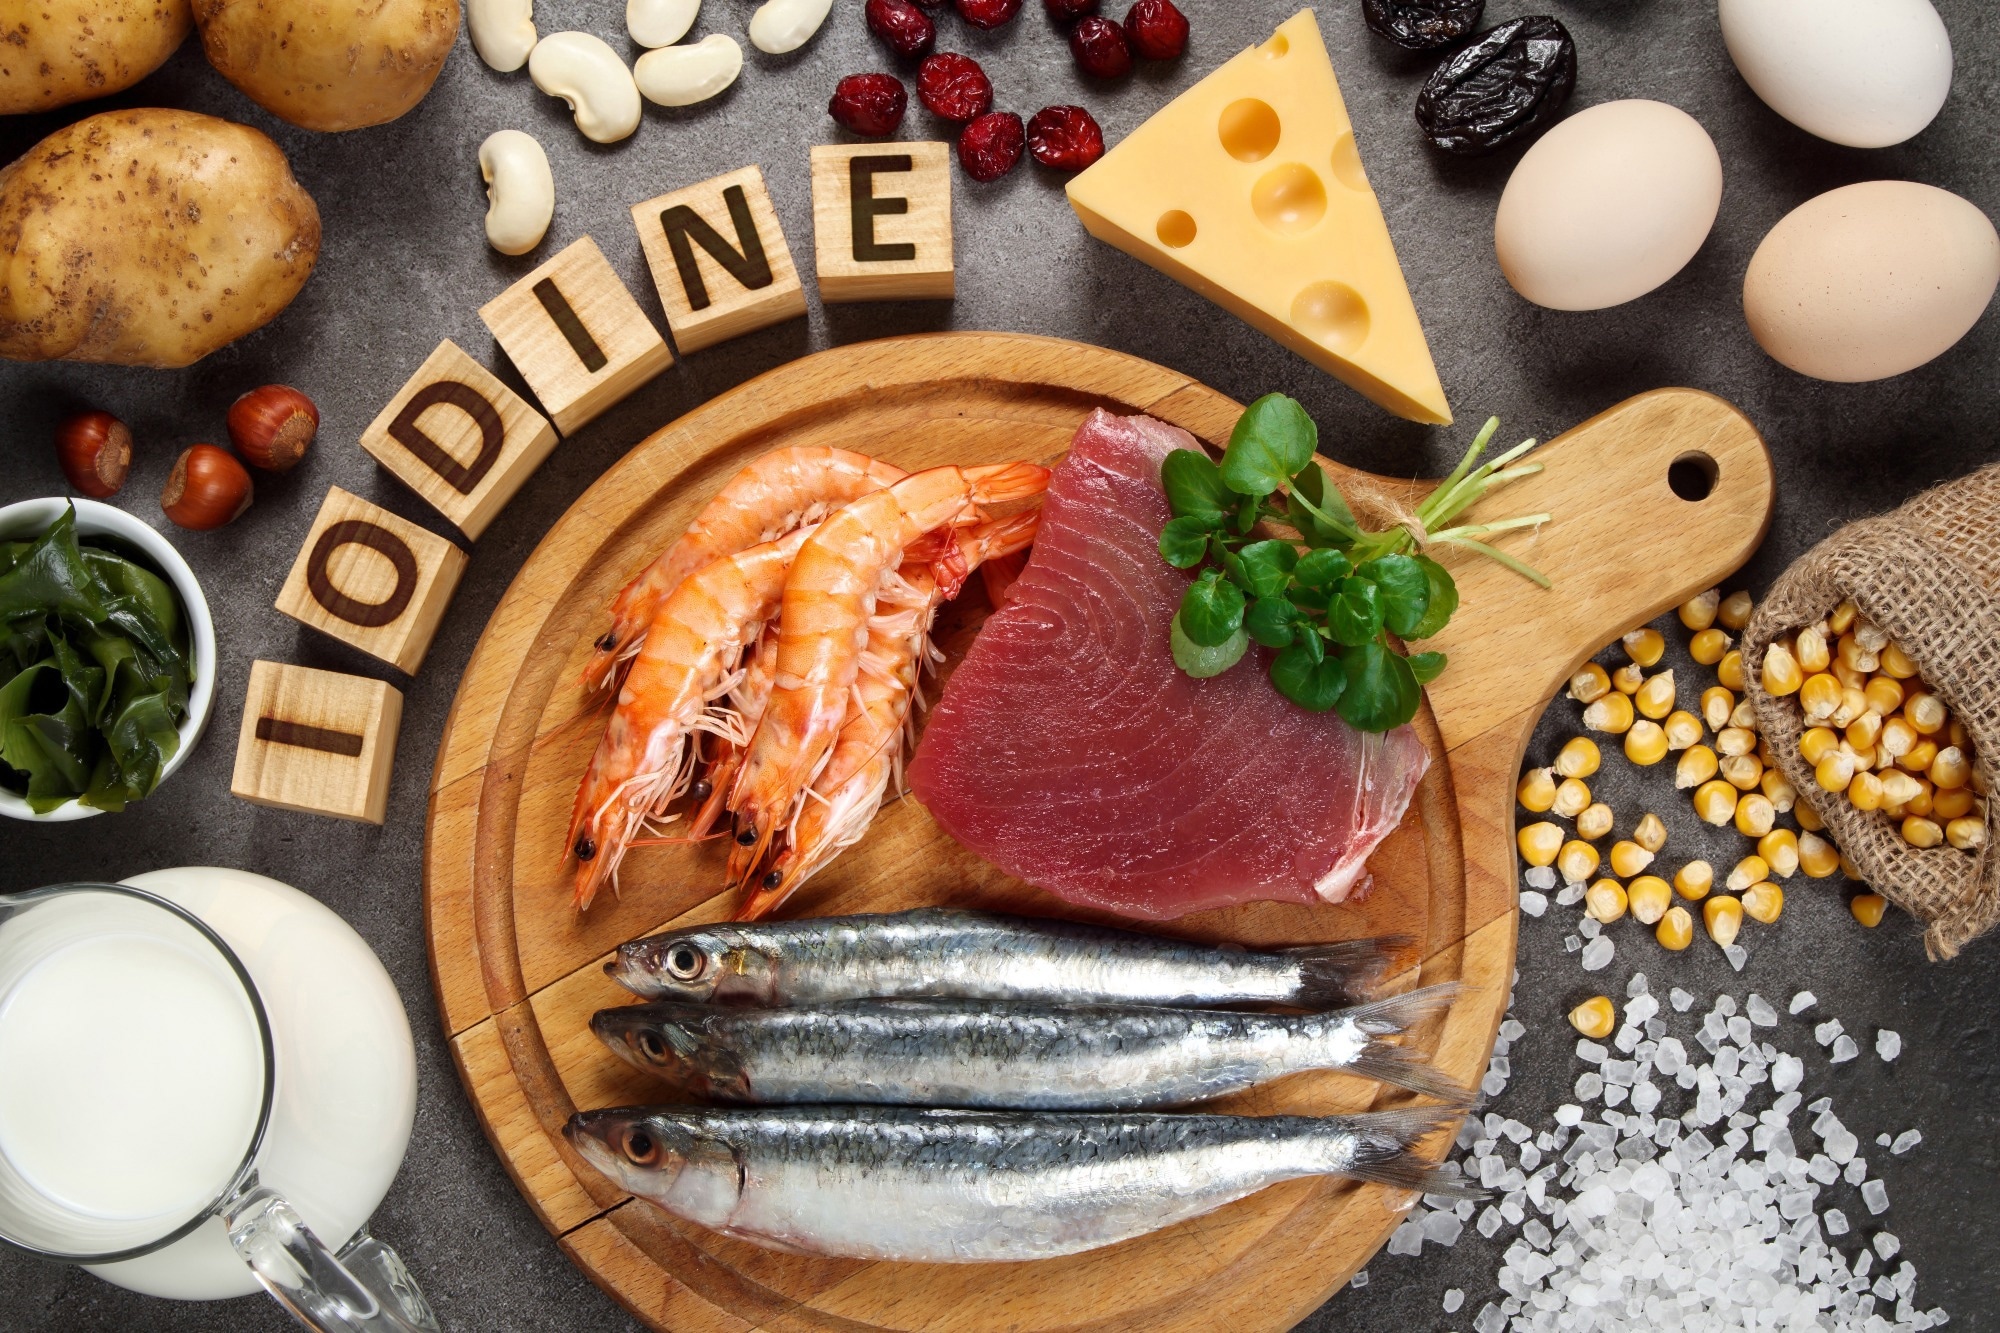 Study: The correlation between iodine and metabolism: a review. Image Credit: Evan Lorne/Shutterstock.com